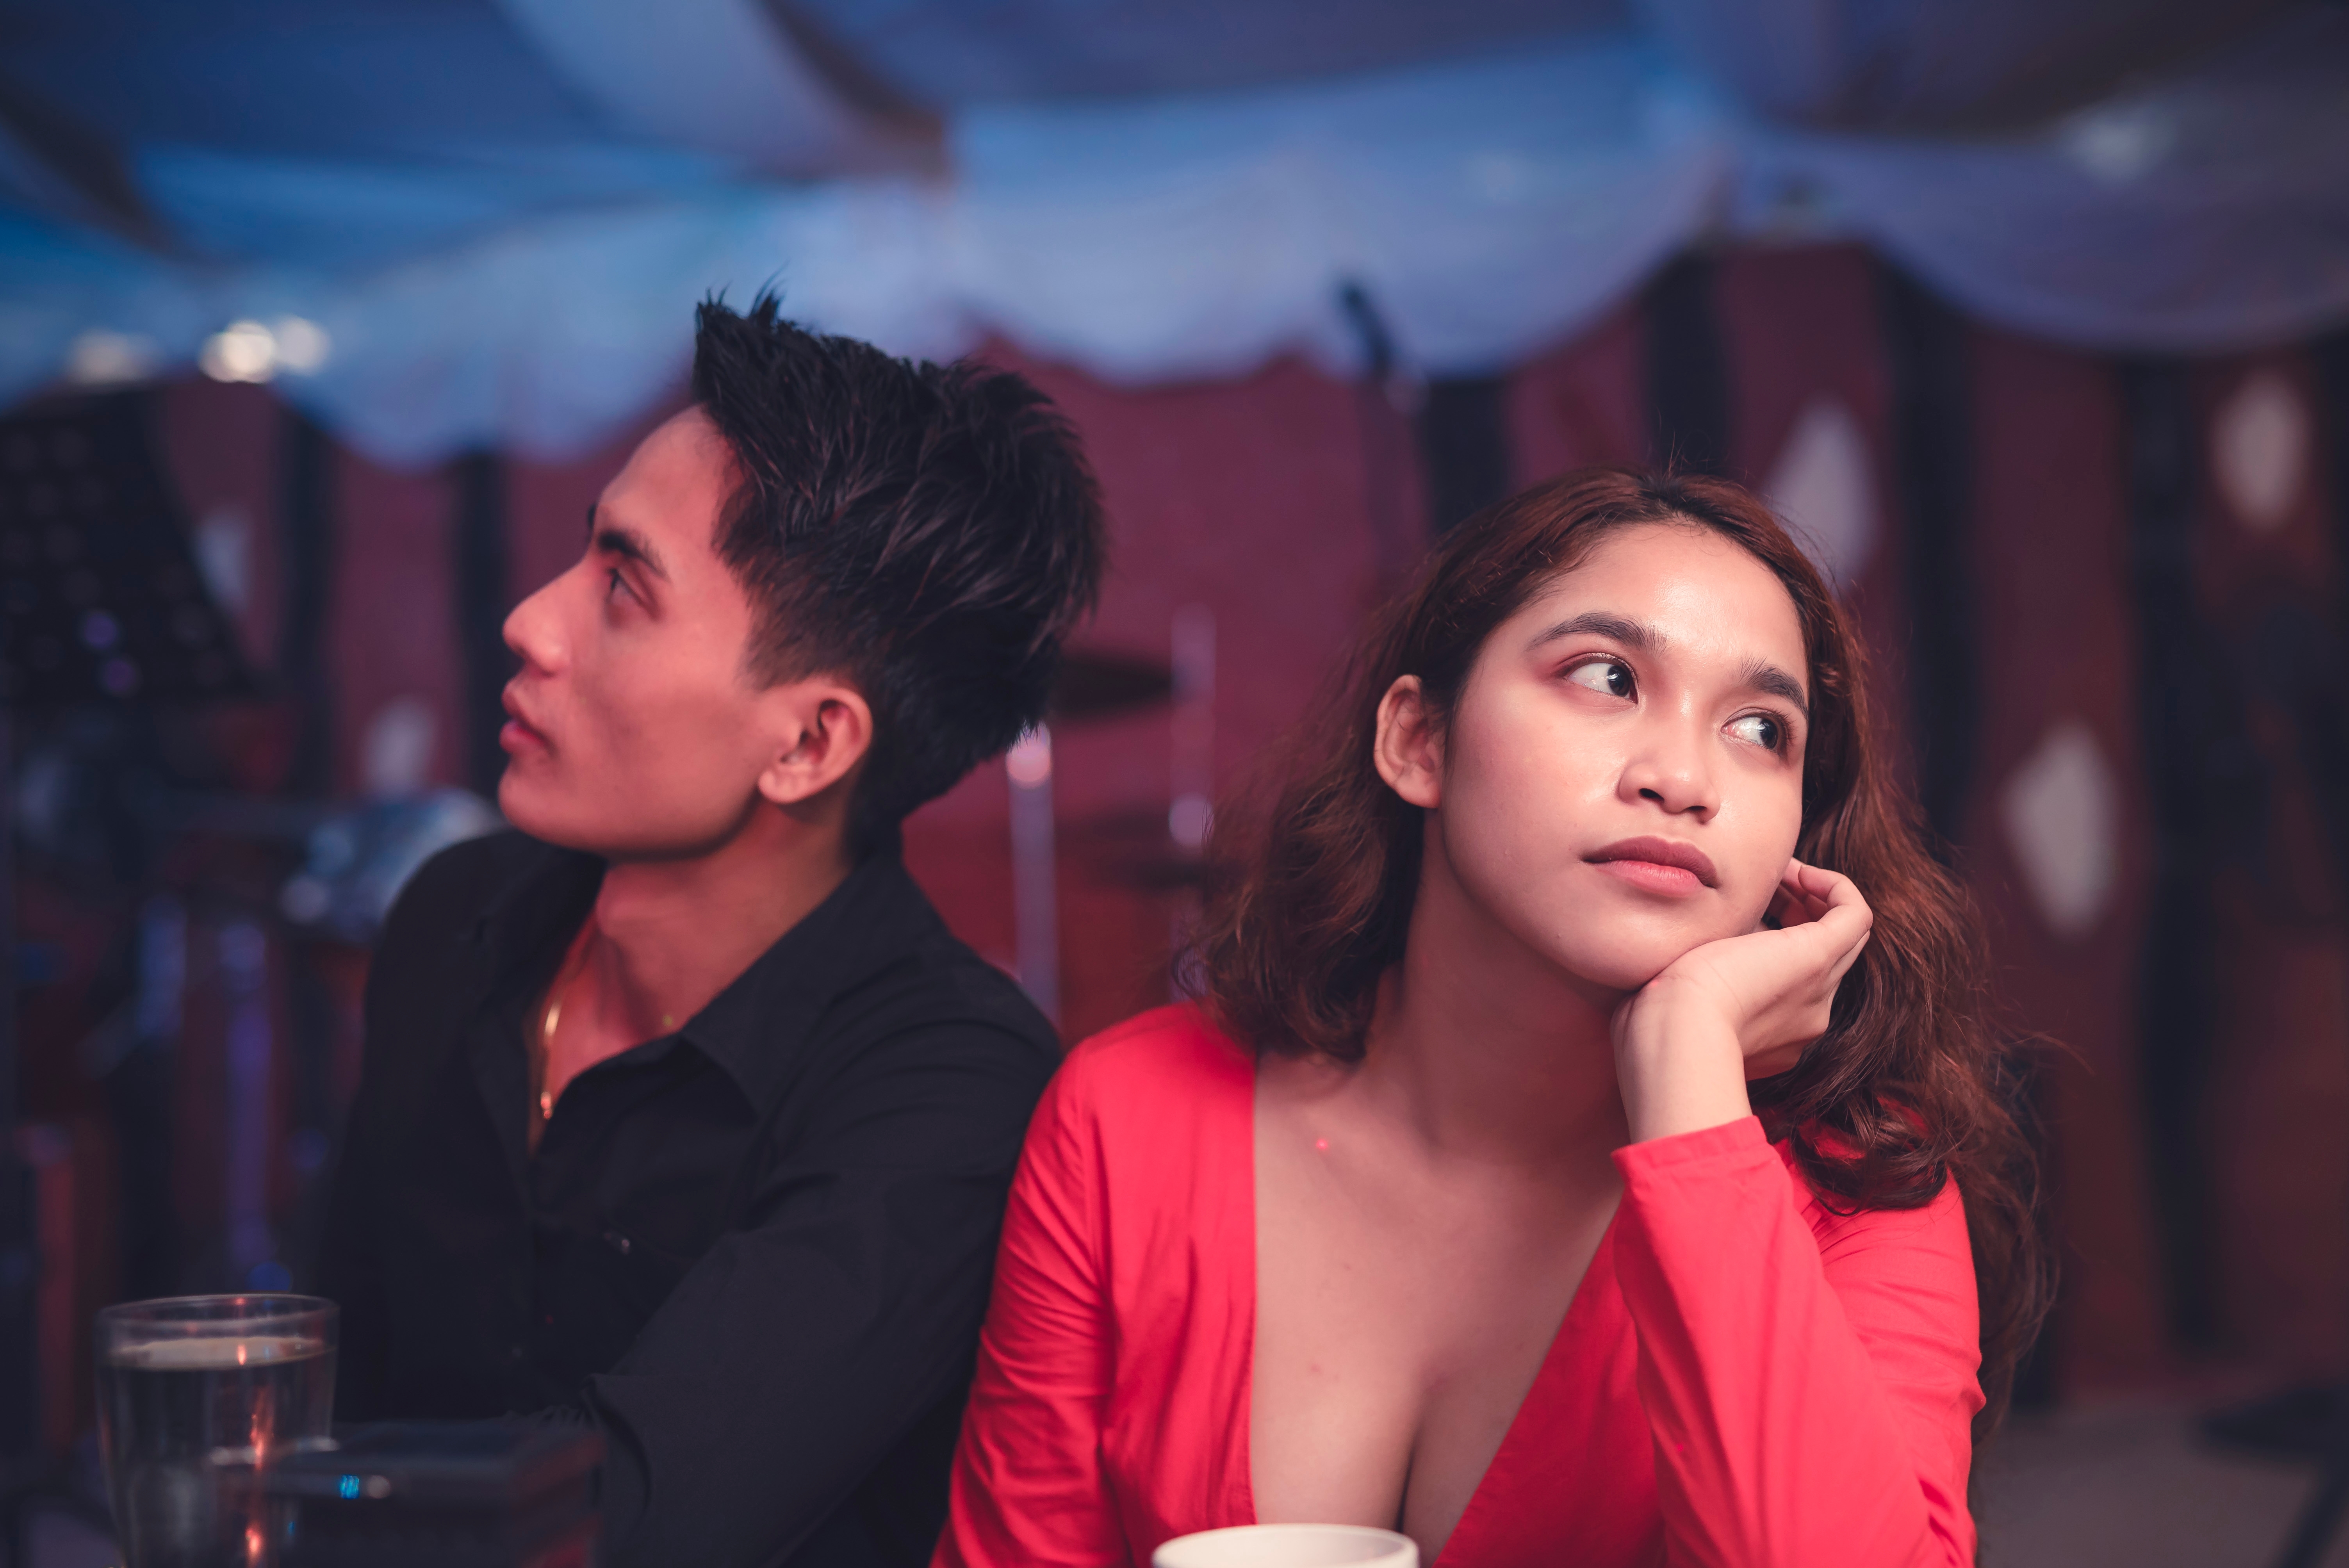 A young couple upset with each other during a date | Source: Shutterstock